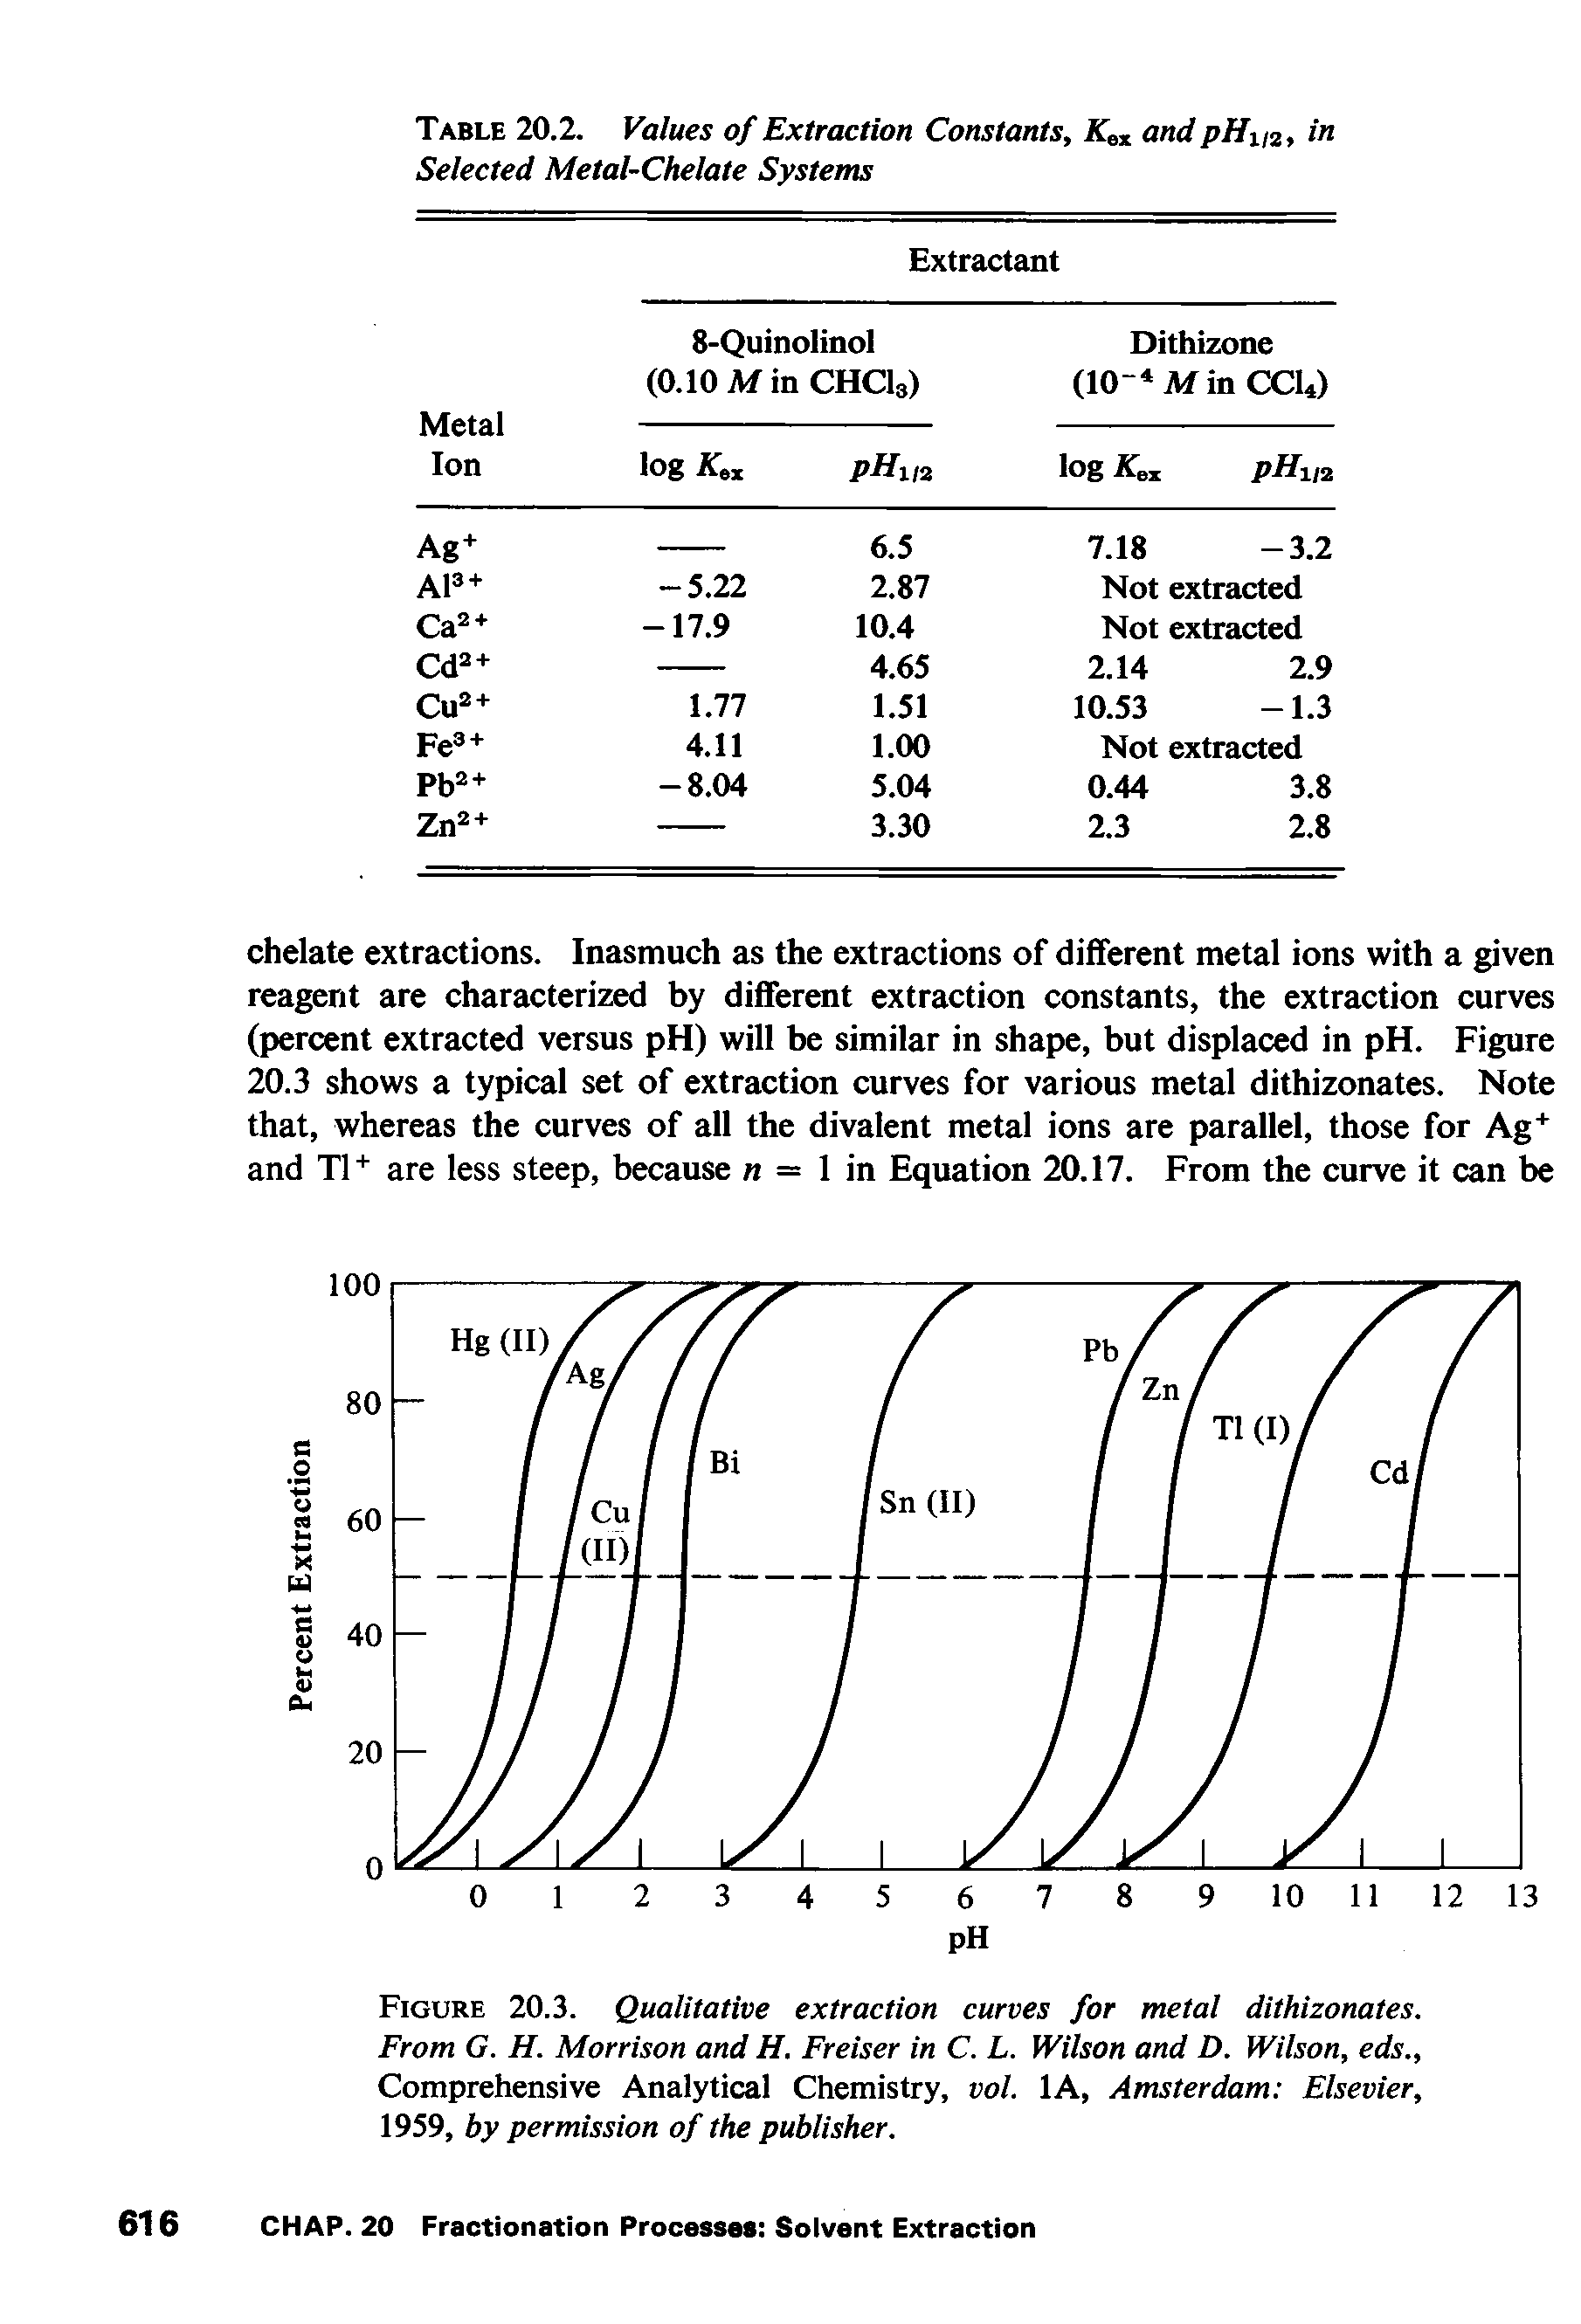 Figure 20.3. Qualitative extraction curves for metal dithizonates. From G. H. Morrison and H. Preiser in C. L. Wilson and D. Wilson, eds.. Comprehensive Analytical Chemistry, vol. lA, Amsterdam Elsevier, 1959, by permission of the publisher.